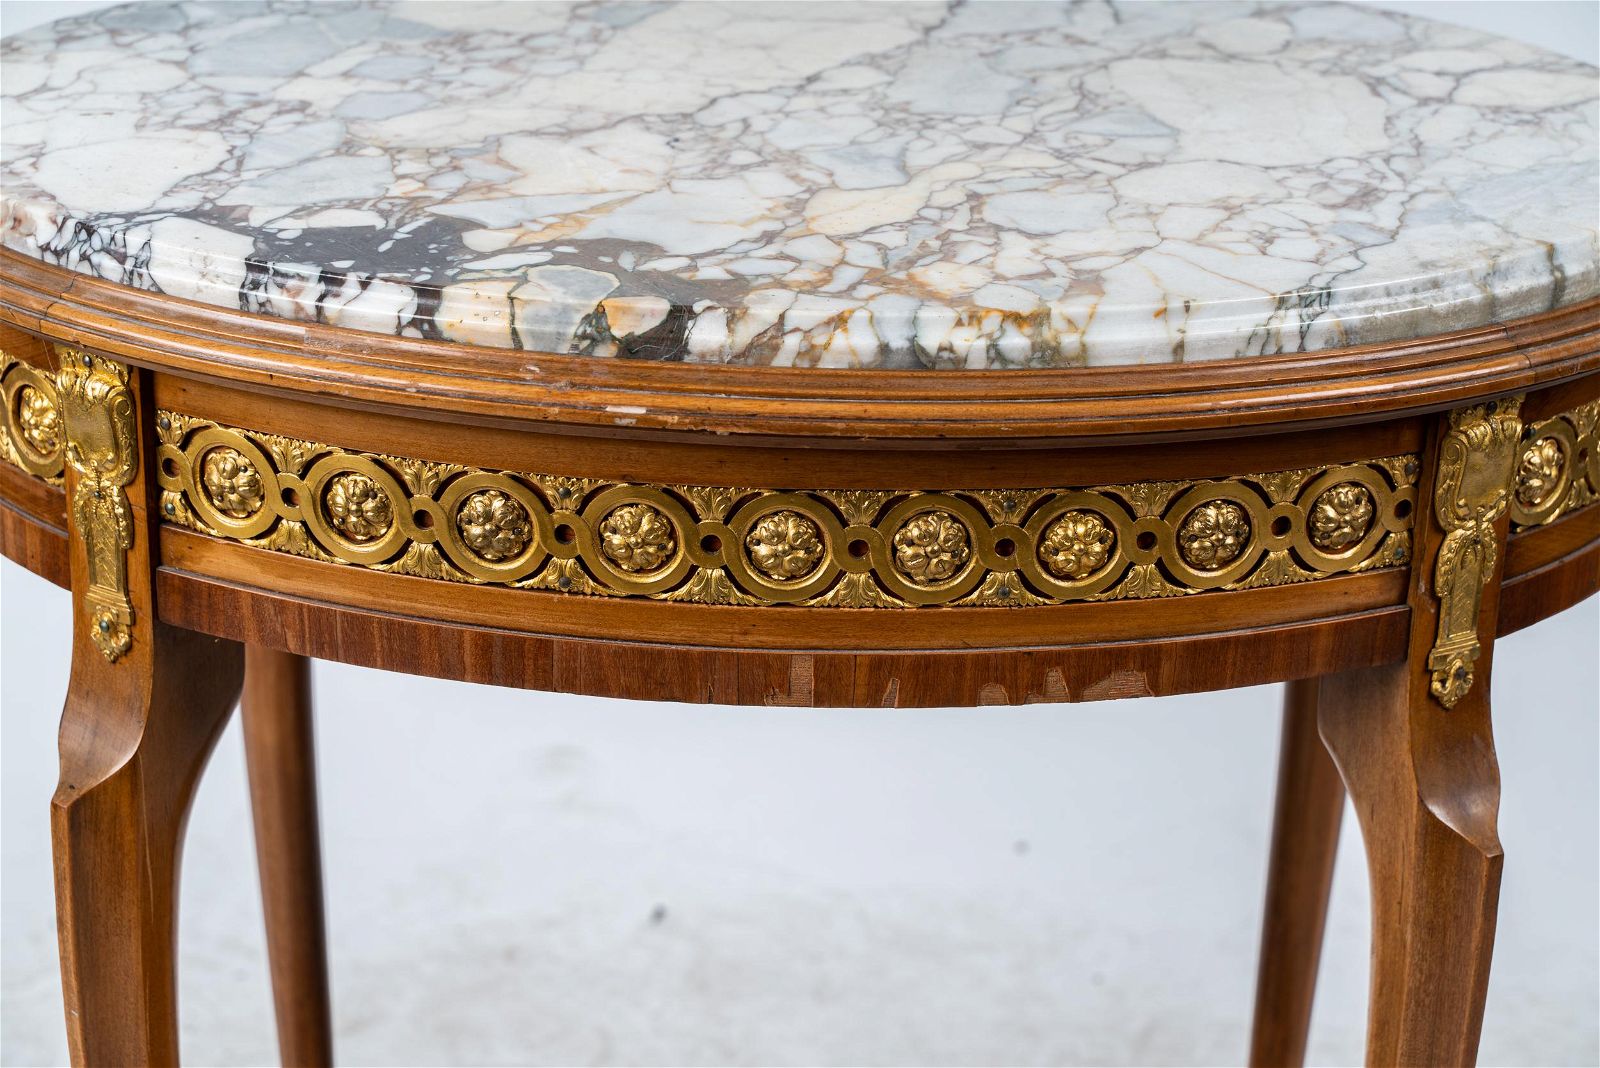 AF1-013: ANTIQUE LATE 19TH CENTURY LOUIS XV TRANSITIONAL STYLE FRENCH WALNUT MARBLE-INSET GUERIDON